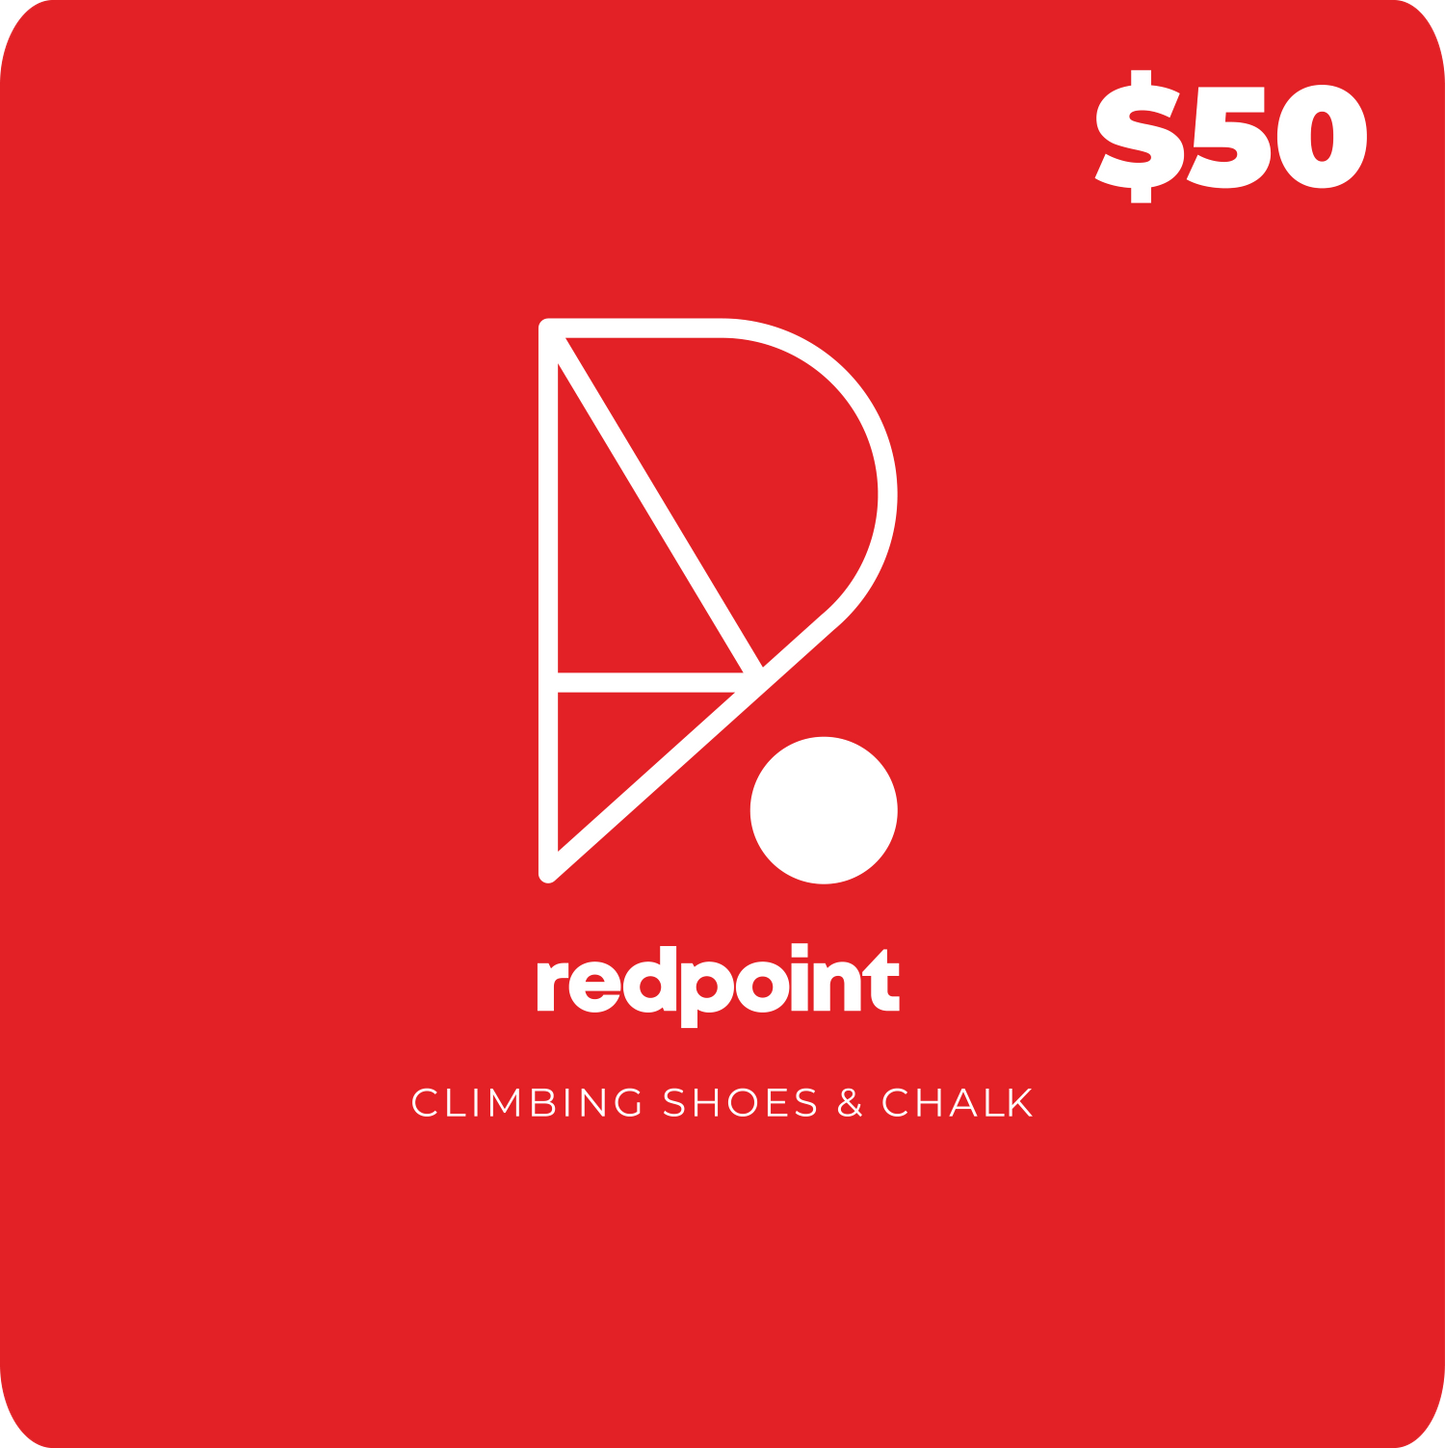 redpoint_climbing_shoes_gift_card_square_50